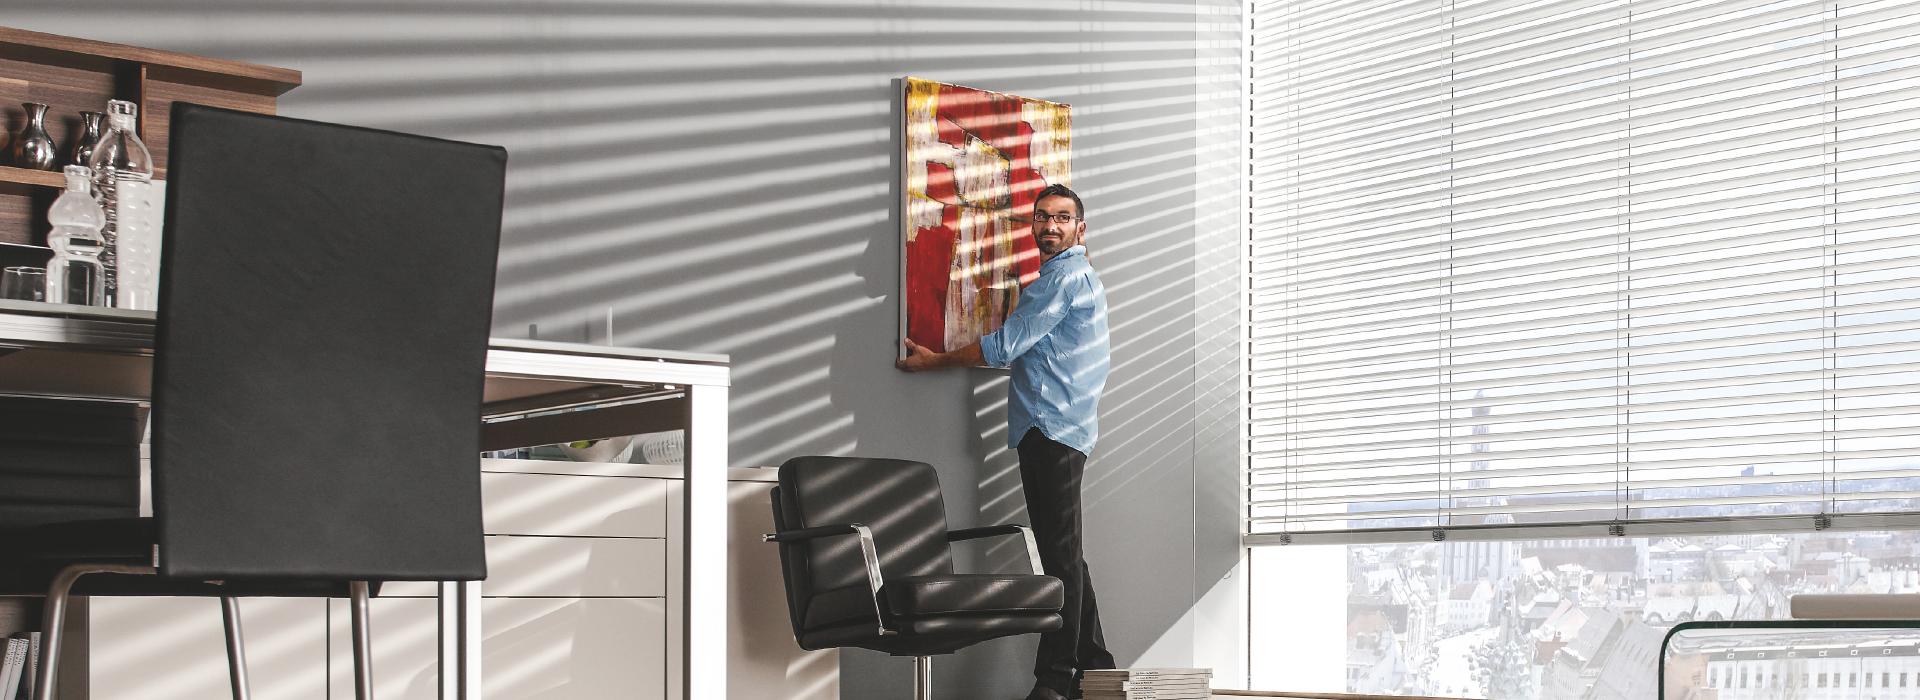 Man hangs up painting in office, external venetian blinds are tilted